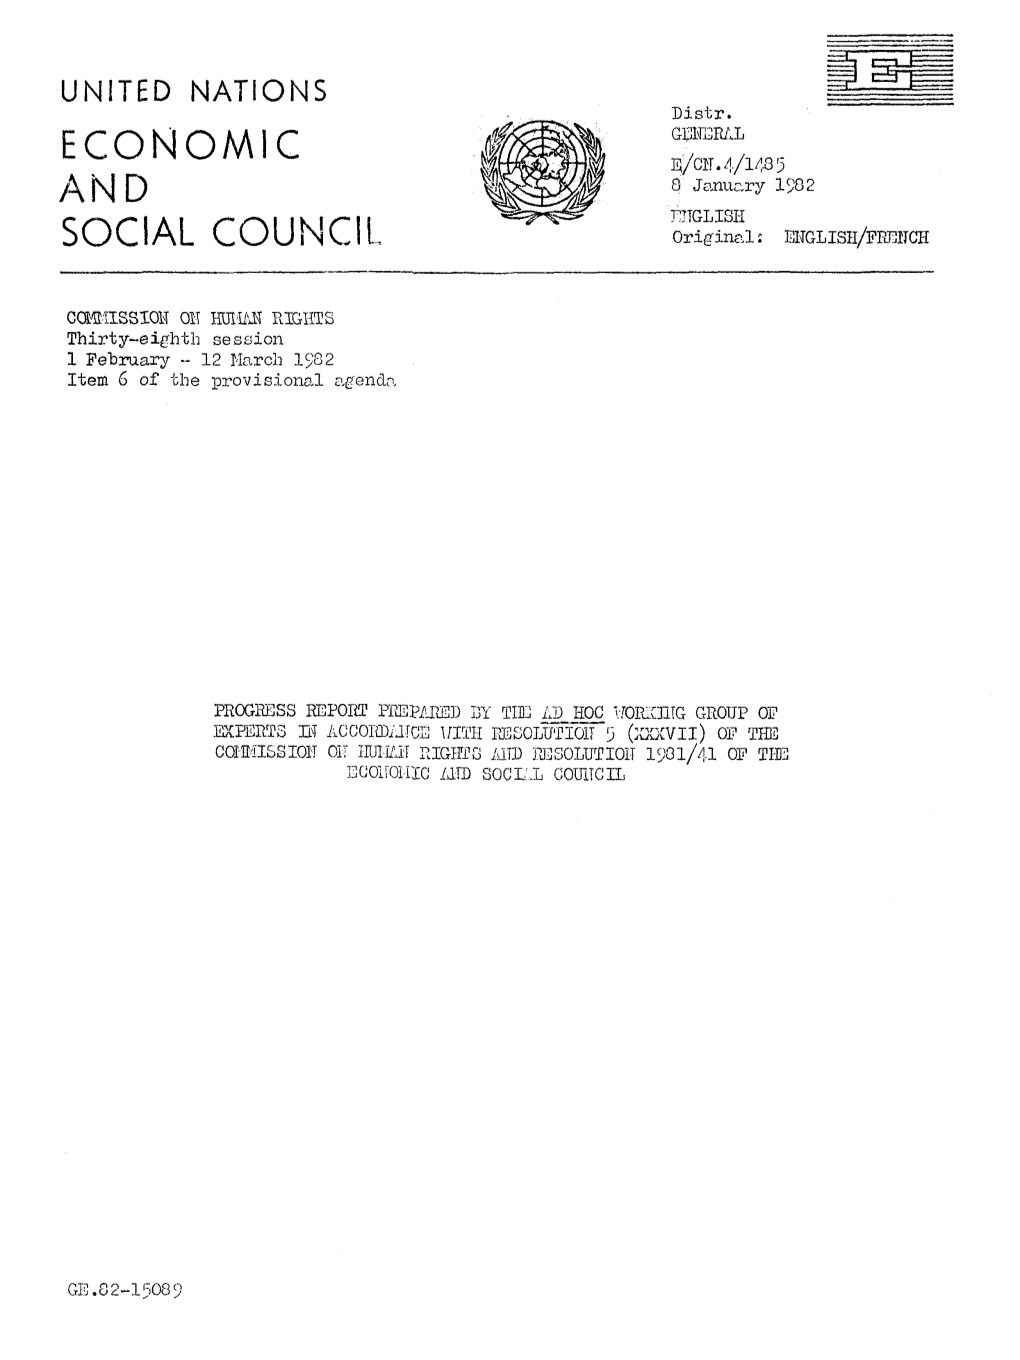 Economic and Social Council Approved This Resolution by Decision I98I/137